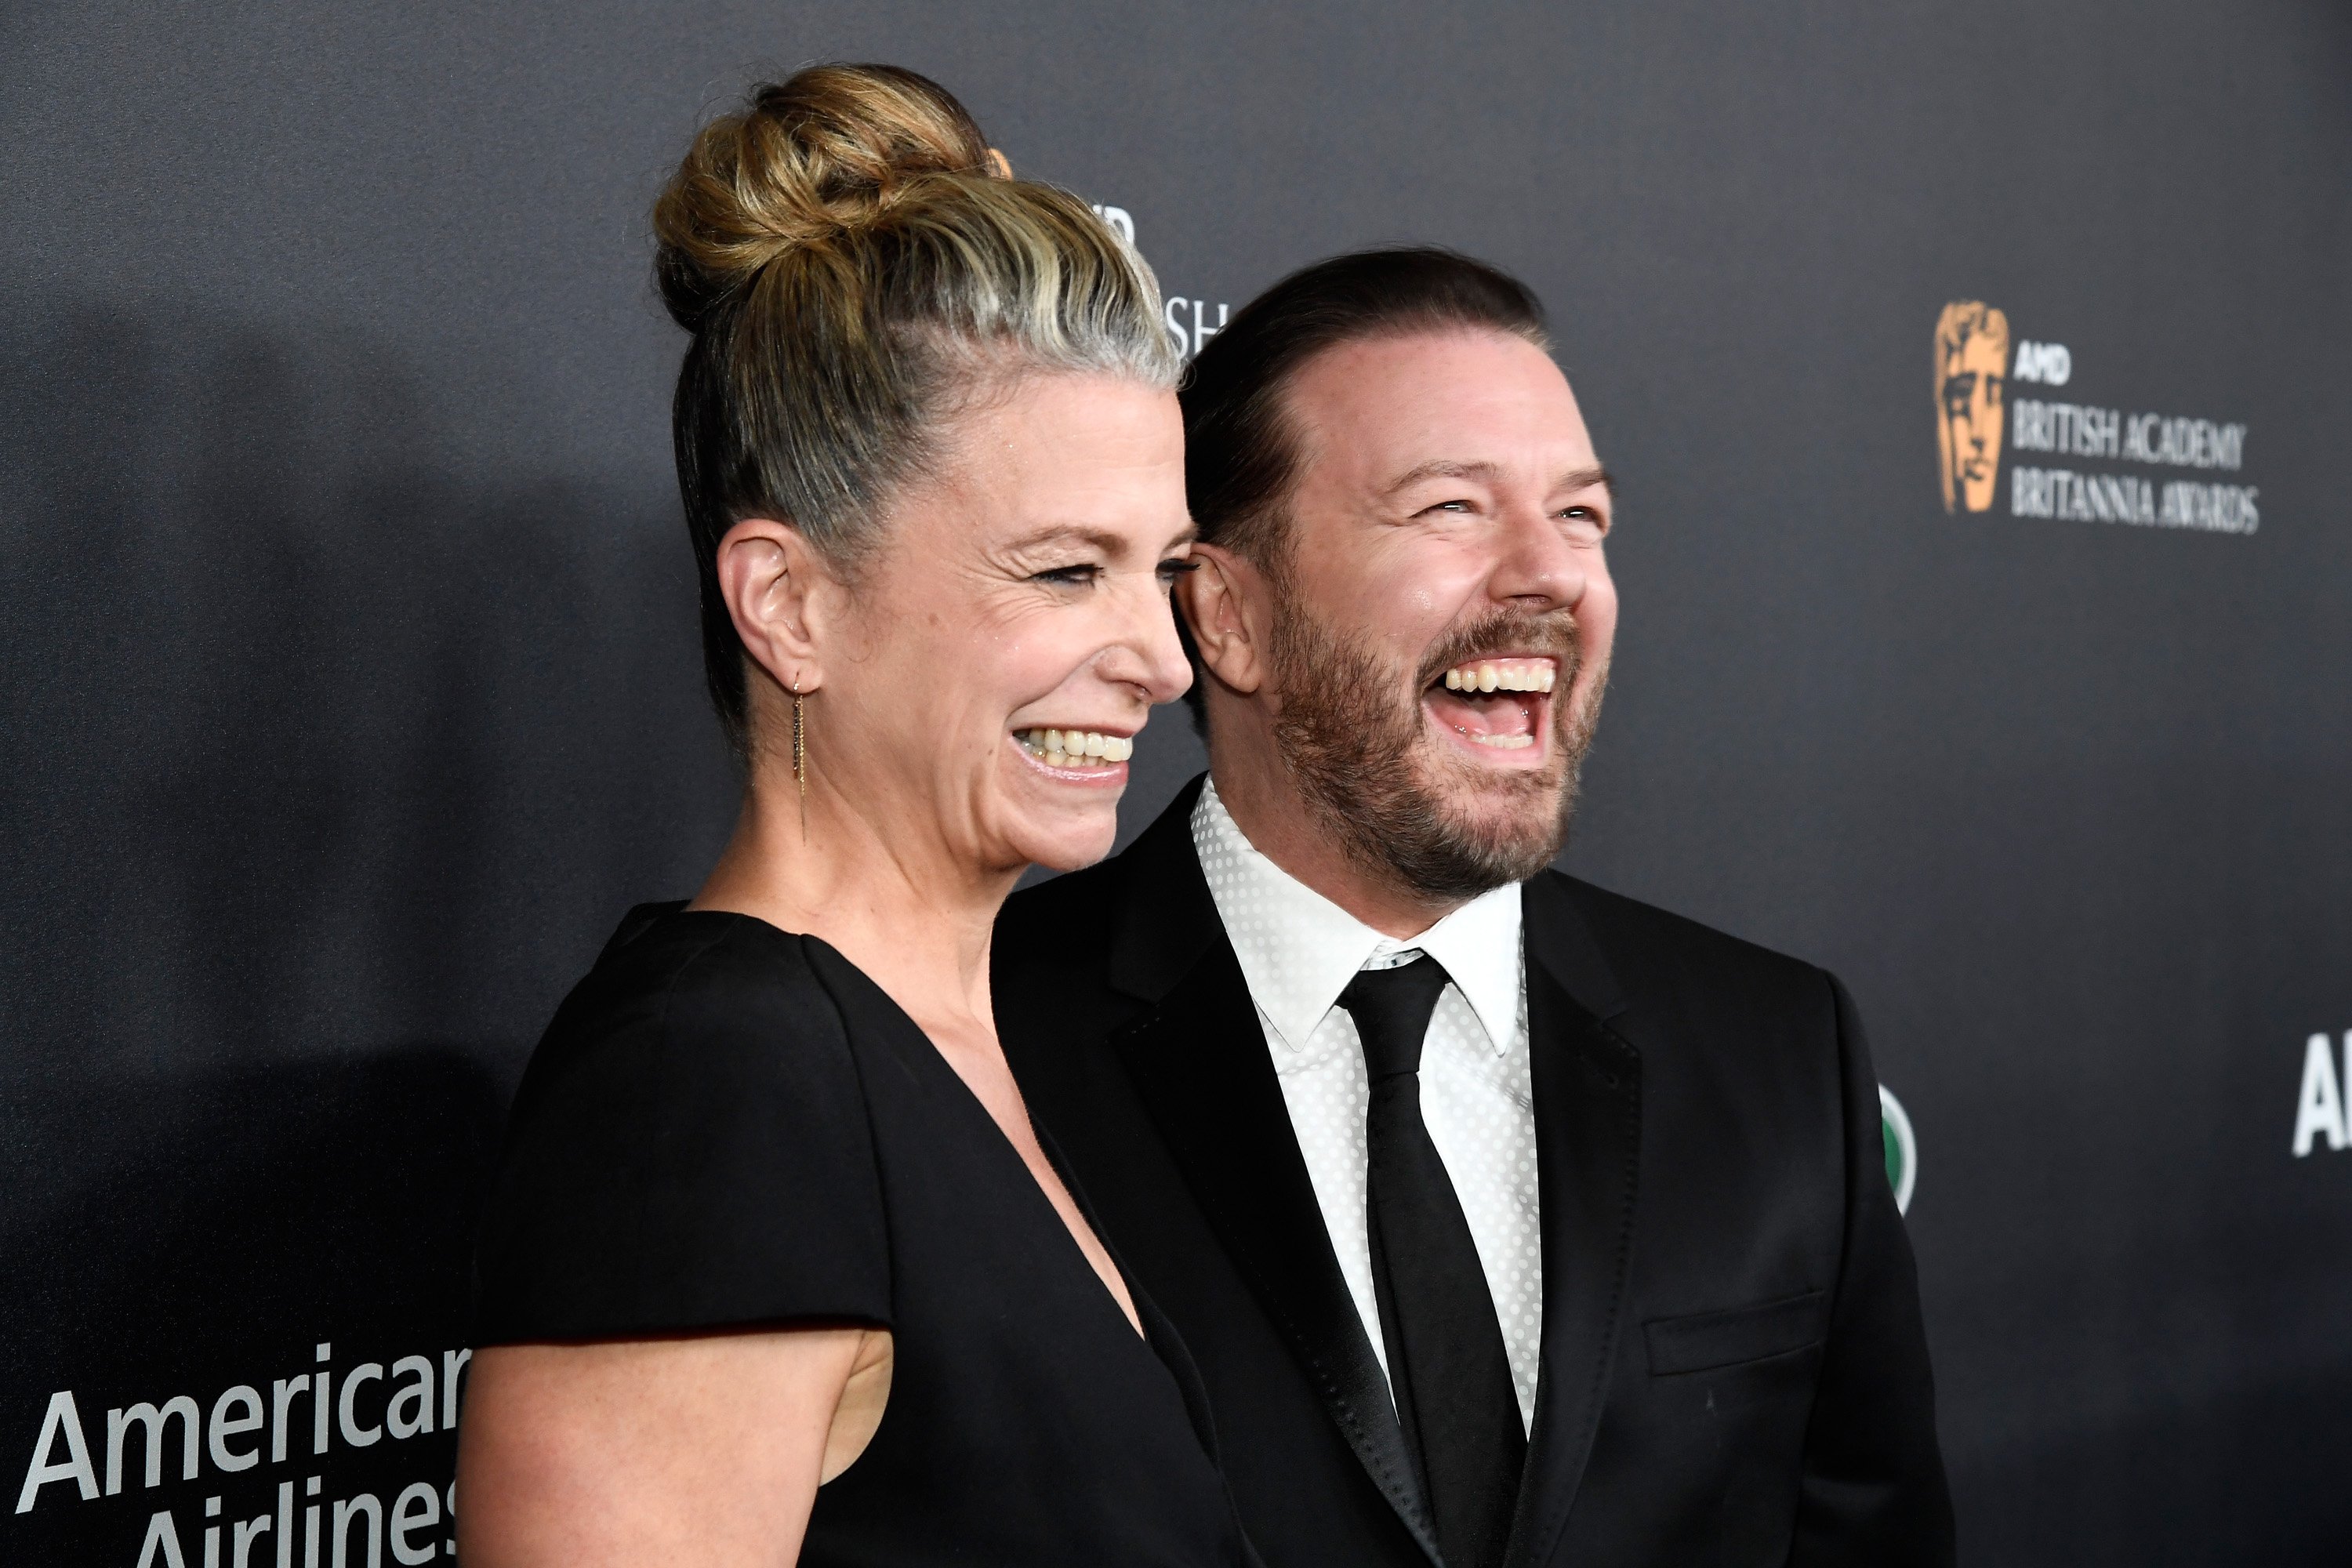 Jane Fallon and Ricky Gervais attend the 2016 AMD British Academy Britannia Awards on October 28, 2016, in Beverly Hills, California. | Source: Getty Images